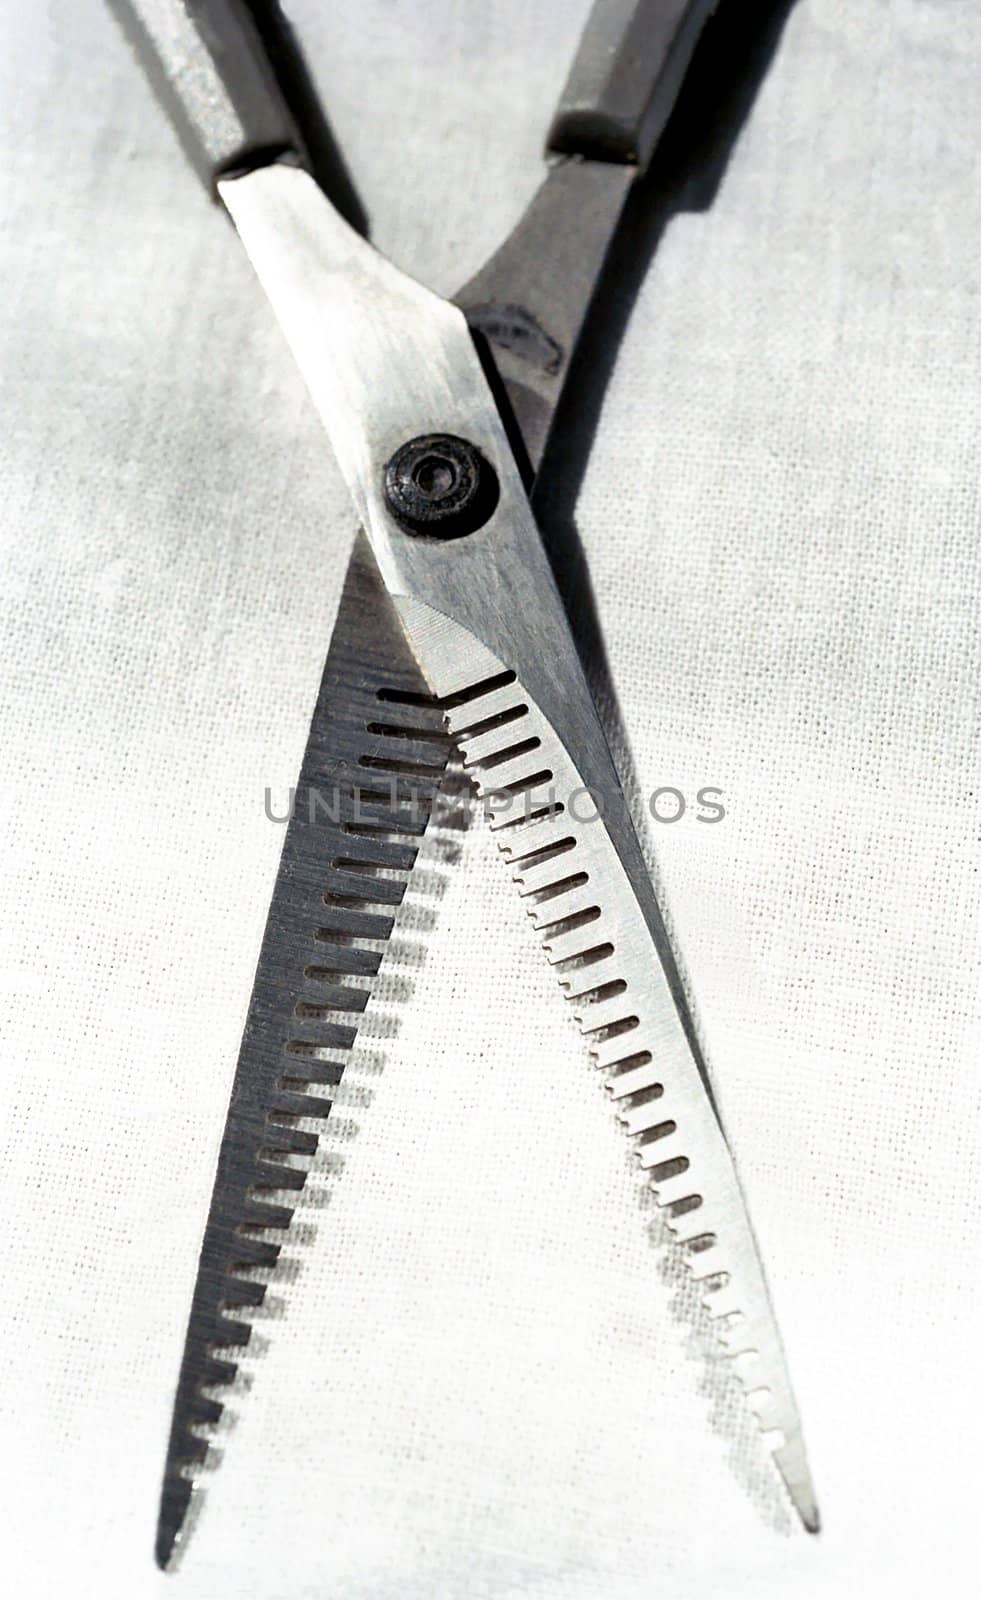 Barber's snippers close-up